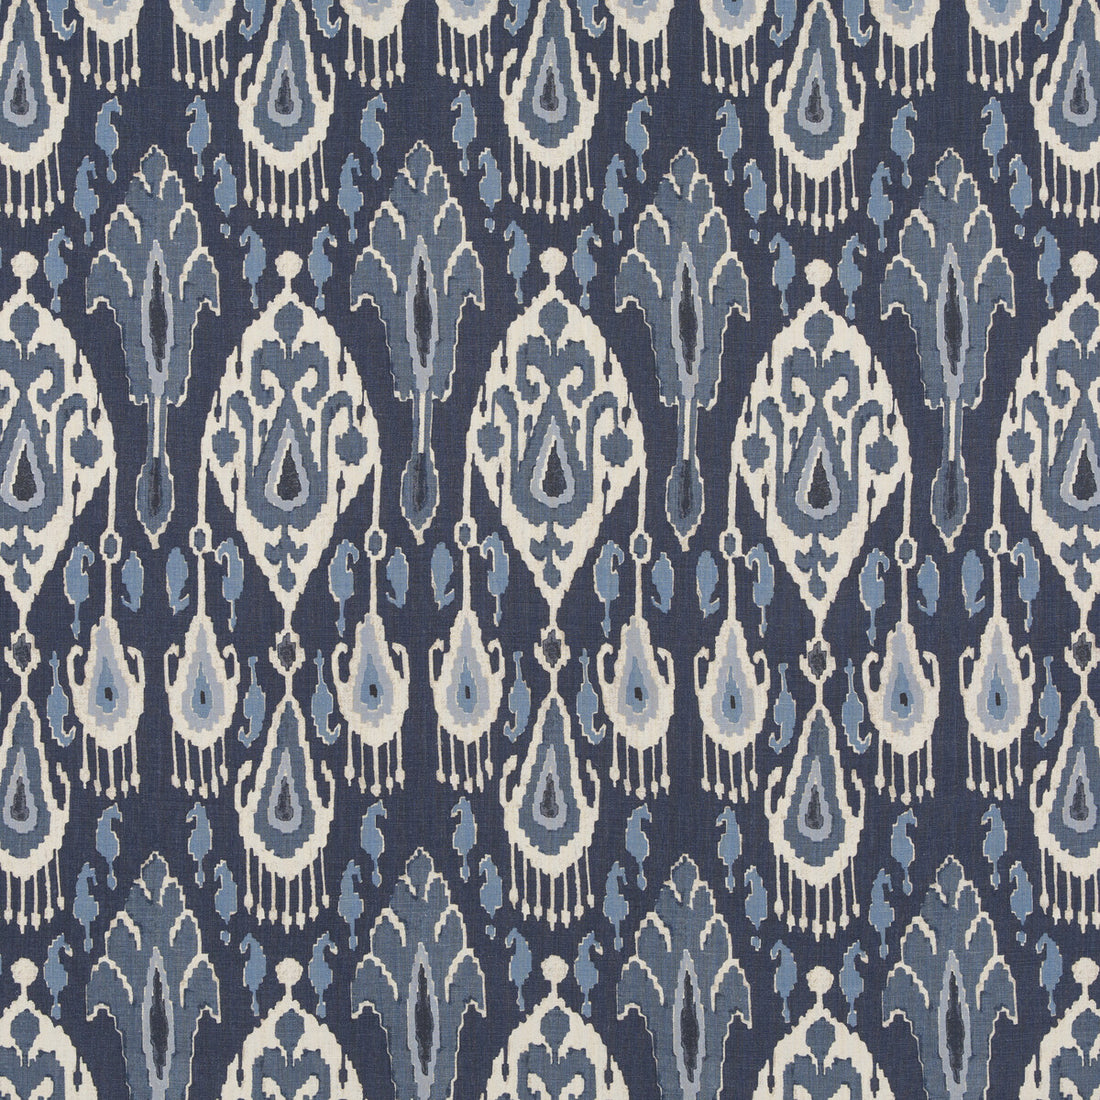 Ikat Bokhara Linen fabric in indigo color - pattern BP10939.1.0 - by G P &amp; J Baker in the Caspian collection